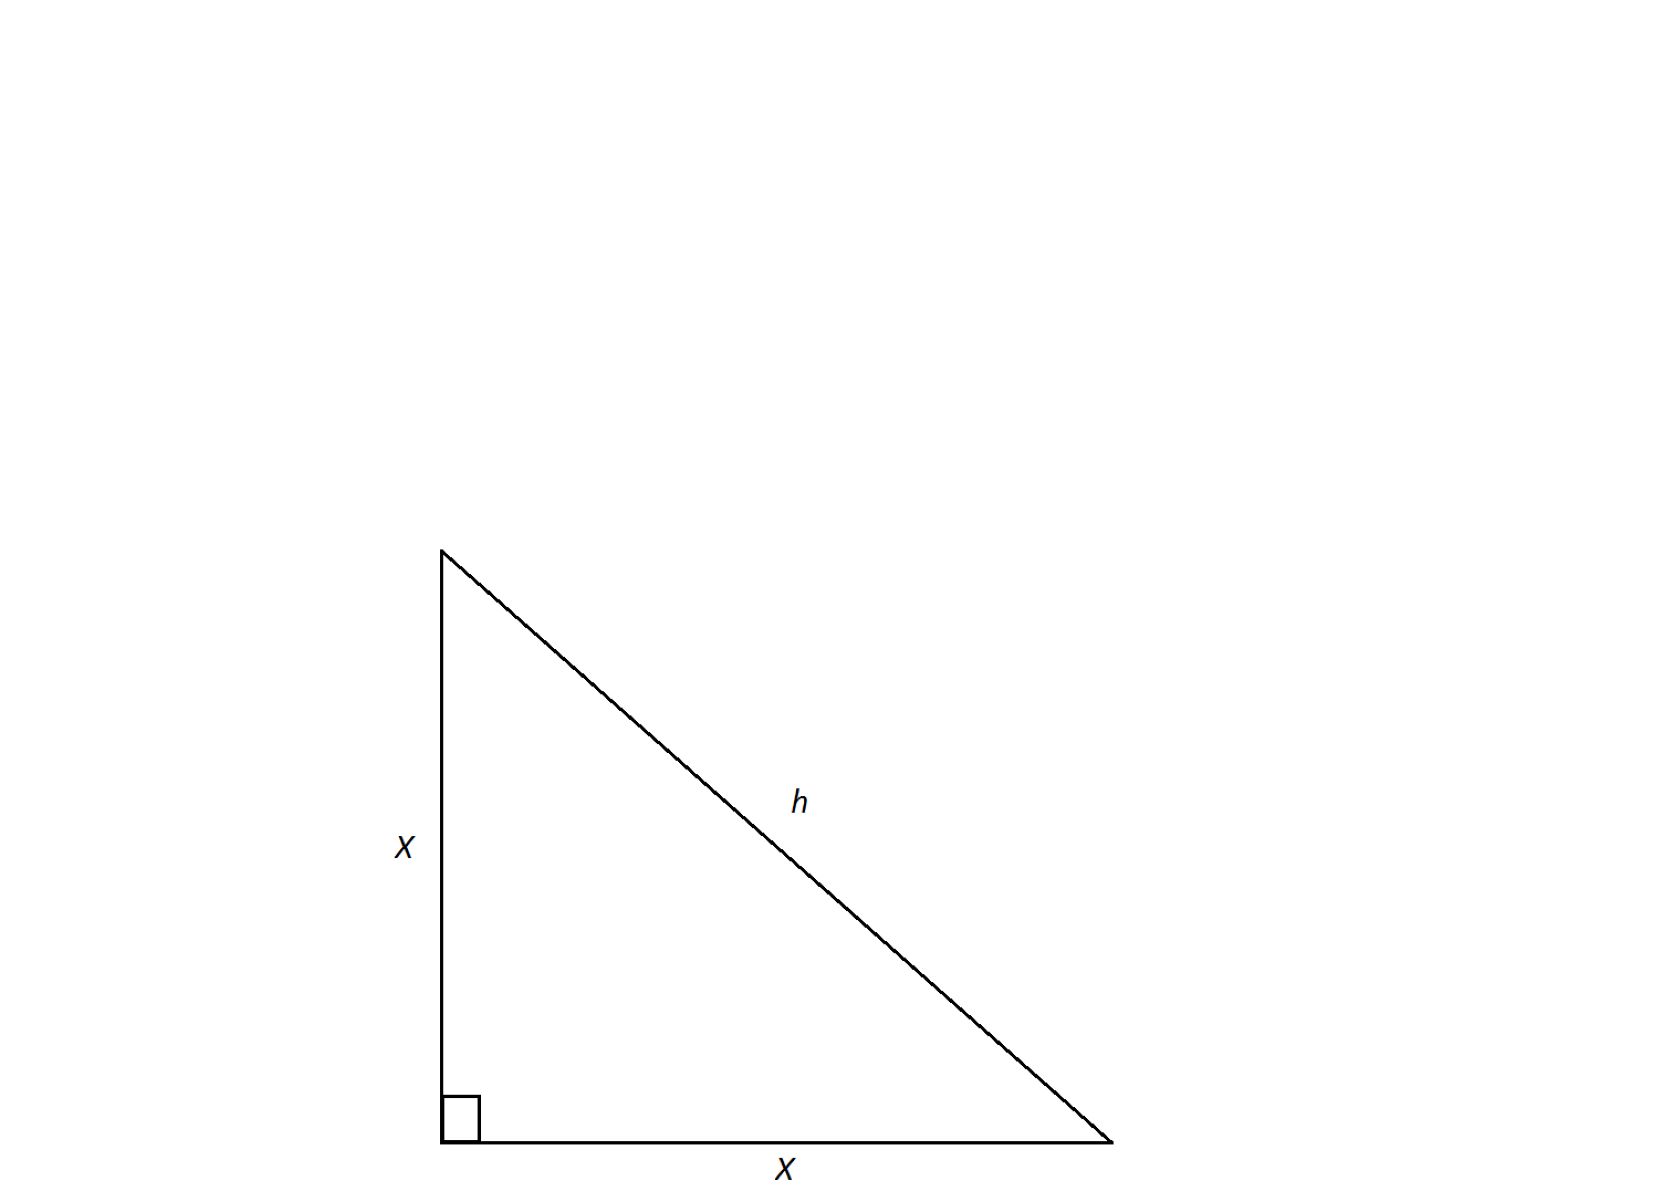 The Ultimate Hack To Find The Missing Side Length Of A Right Triangle!